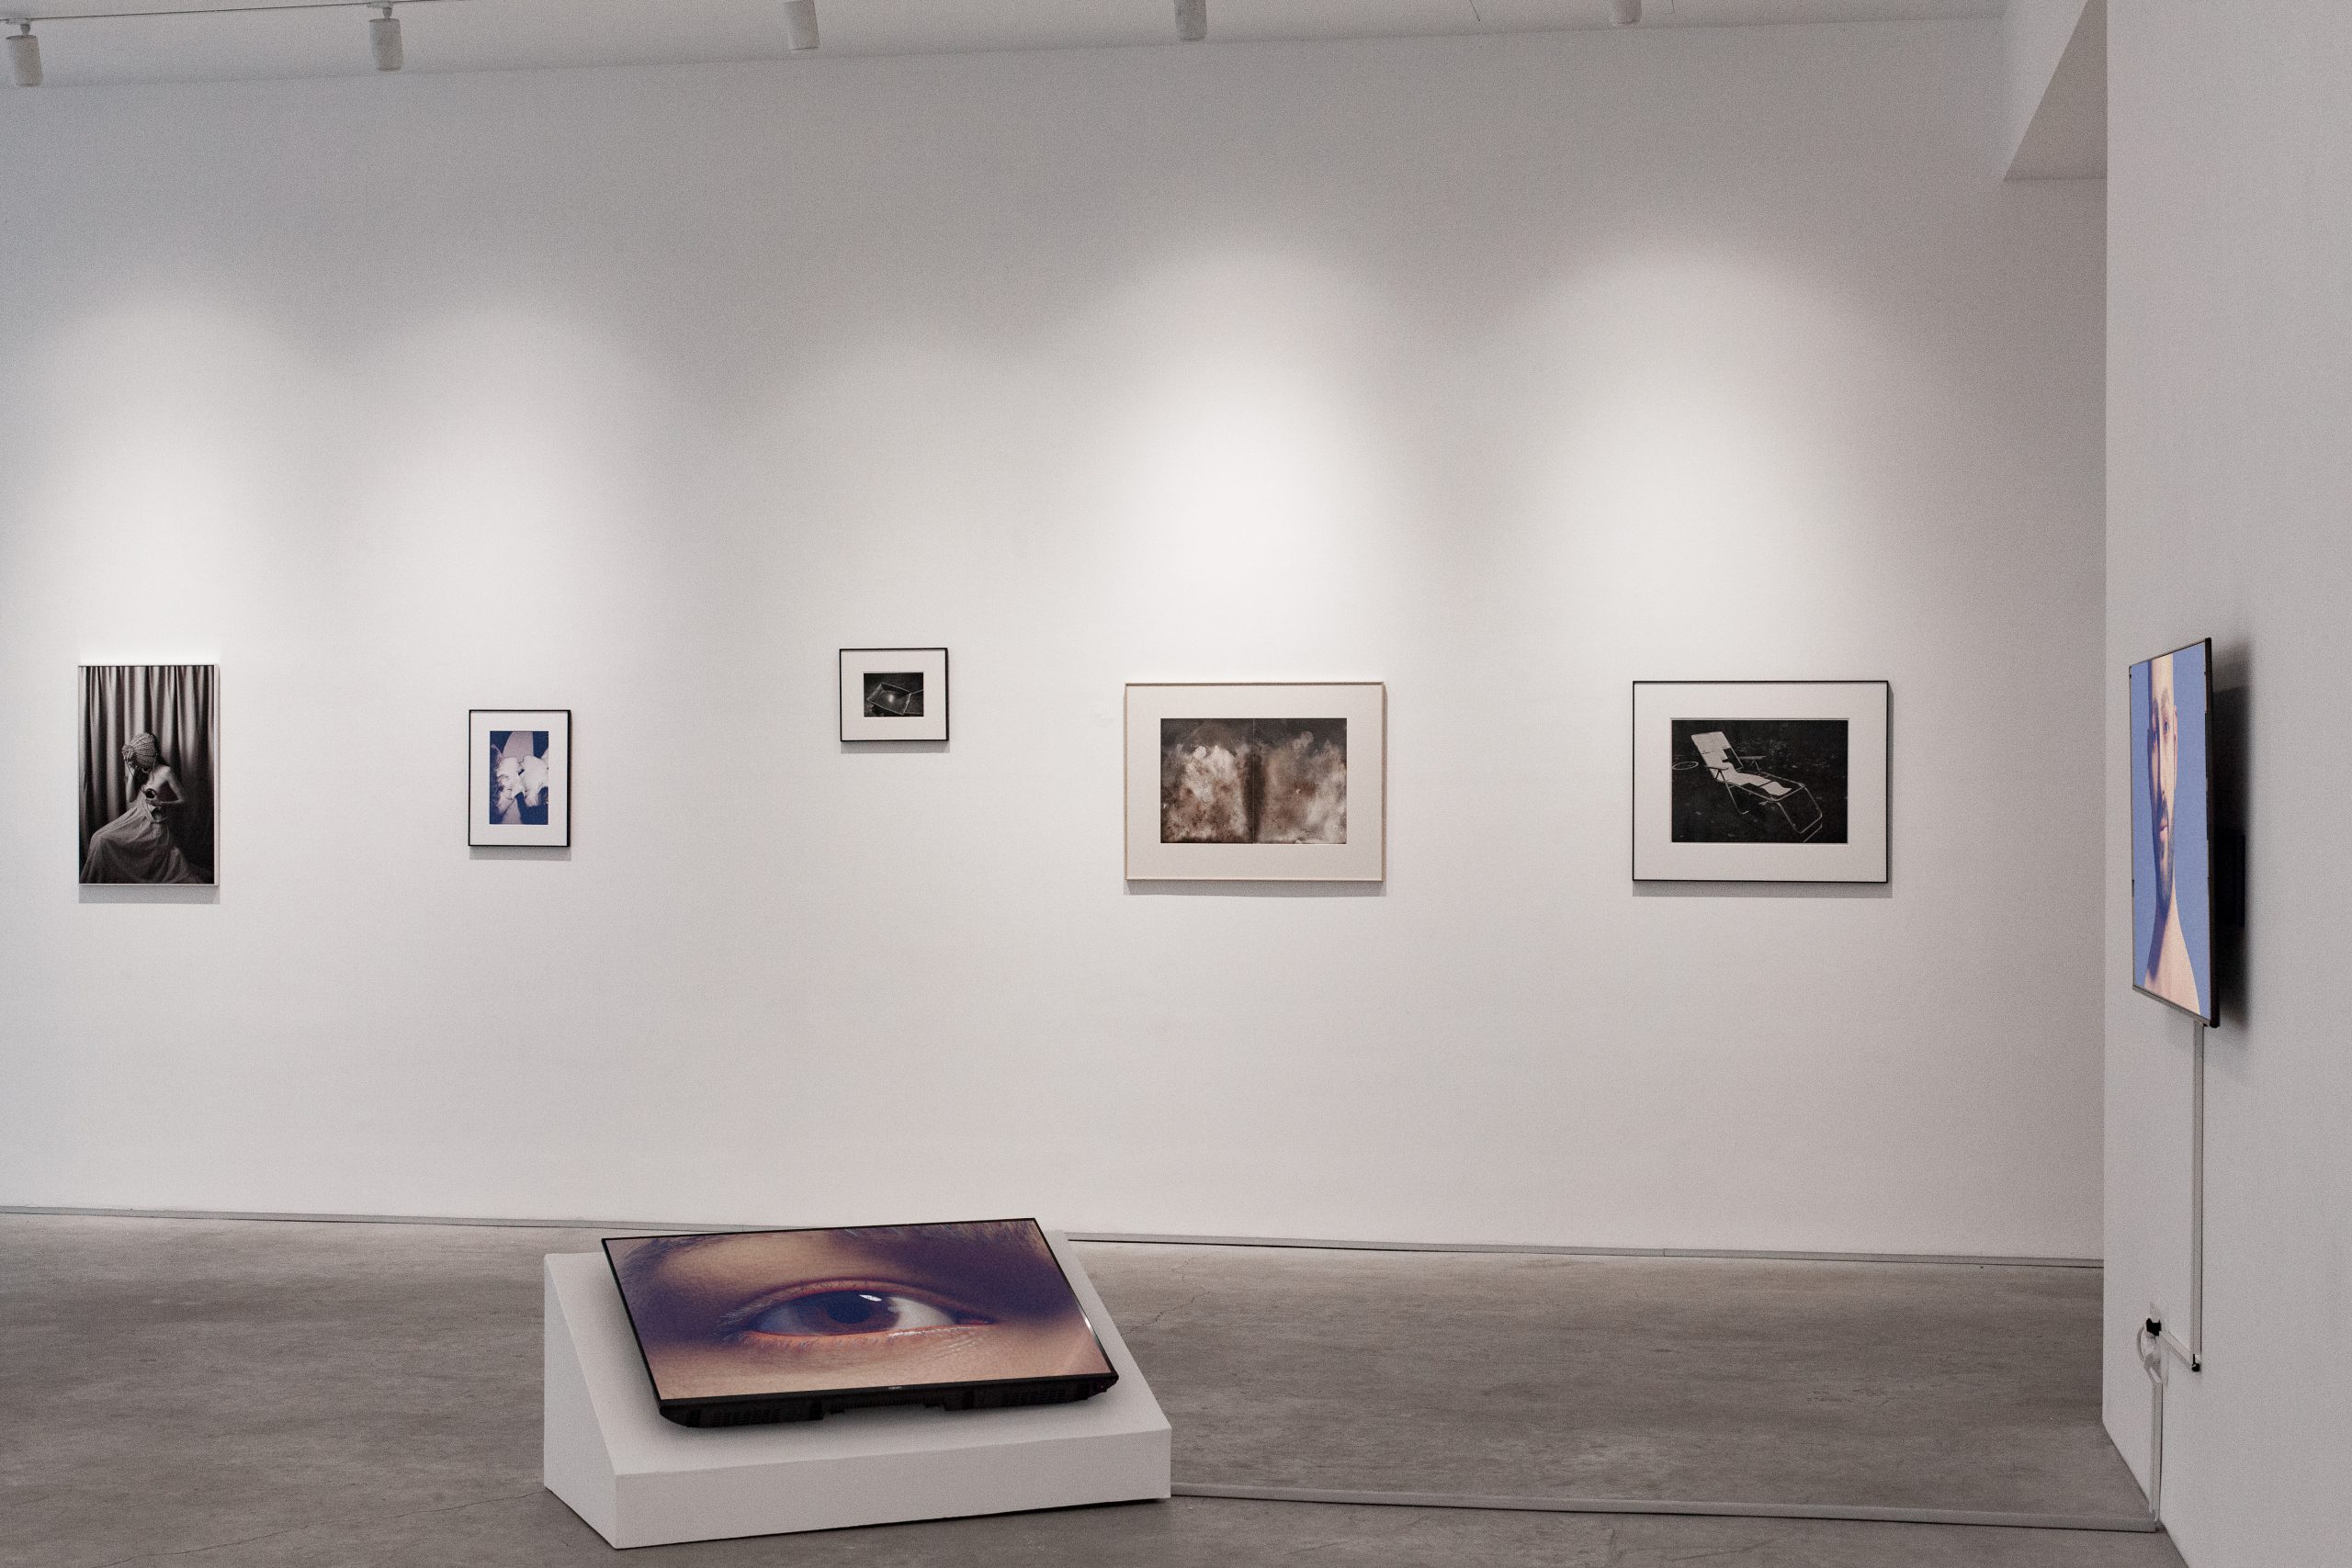 "Body Of Photography", Group show, Installation view at Braverman Gallery, Tel Aviv. Photo by Eden Zornitser